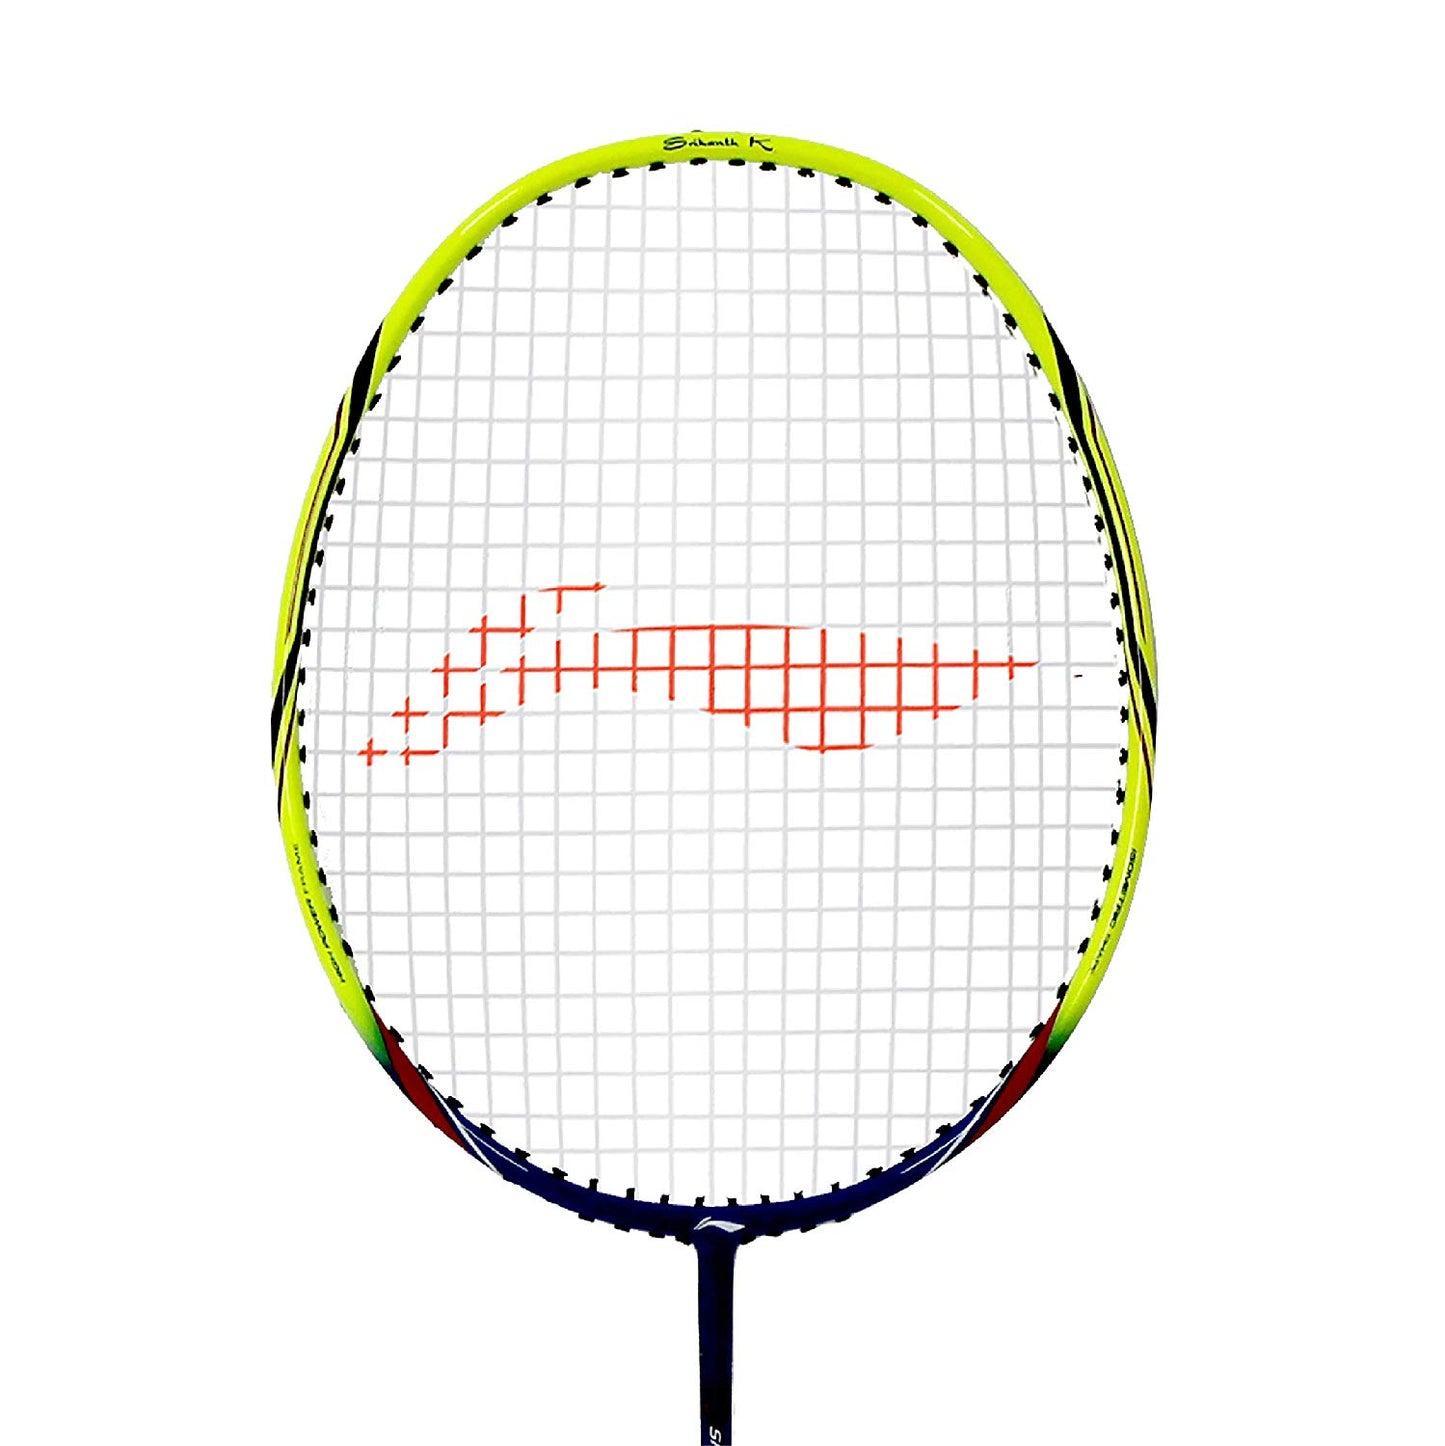 Li-Ning SK Junior 77 (Strung) Badminton Racquets with Free Head Cover Blend - Navy/Lime - Best Price online Prokicksports.com